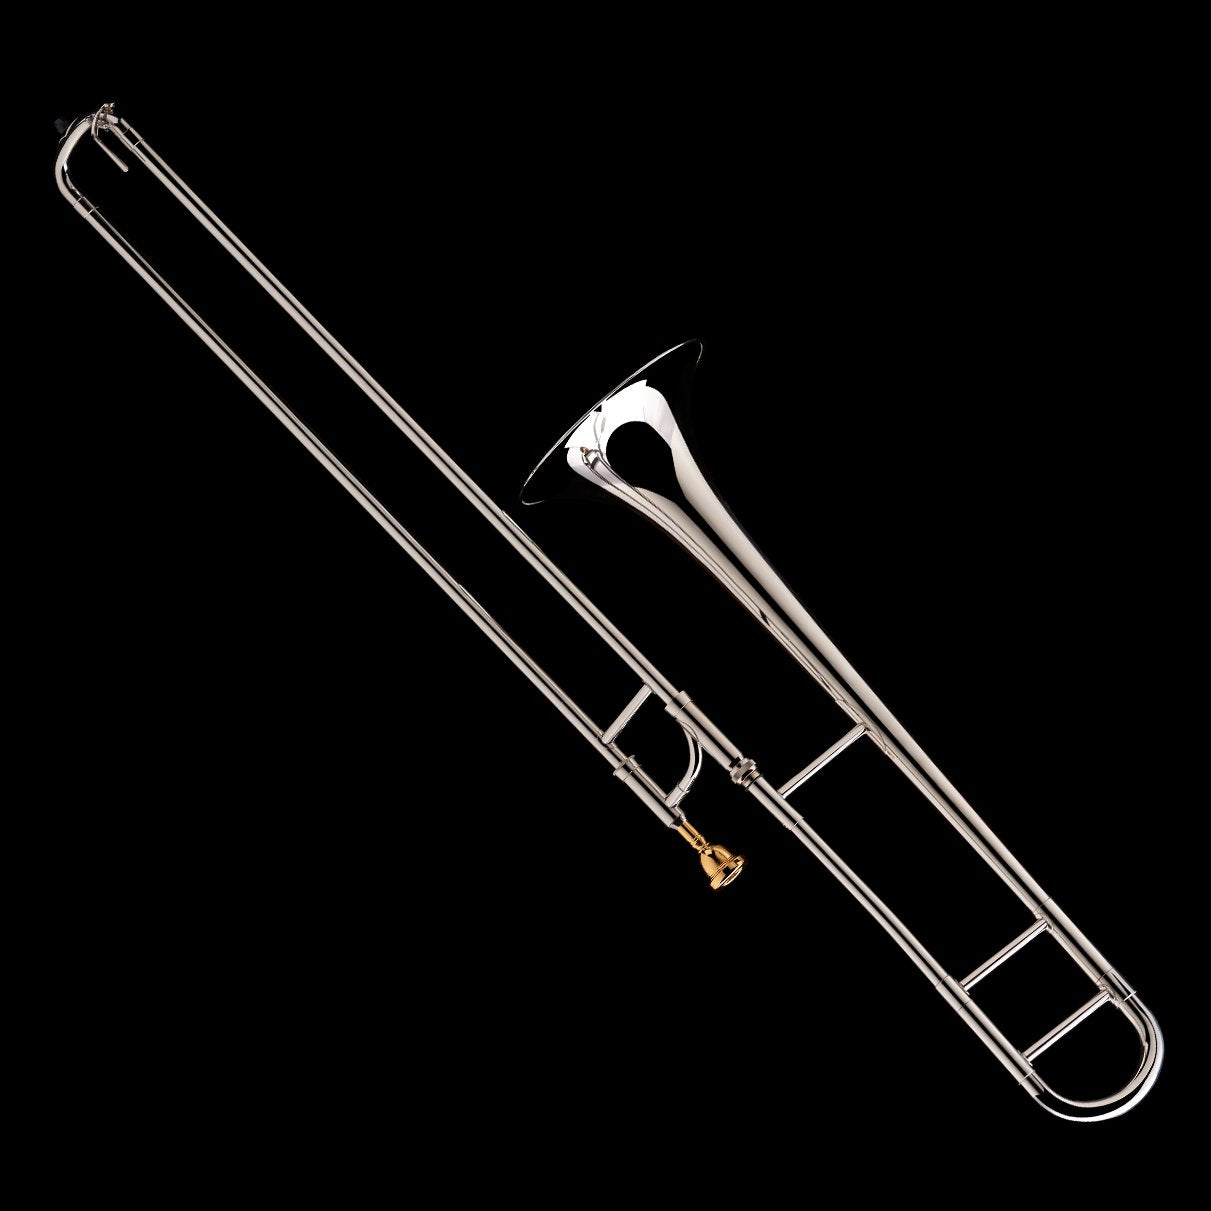 An image of a Bb Tenor Trombone from Wessex Tubas, facing upwards and to the left